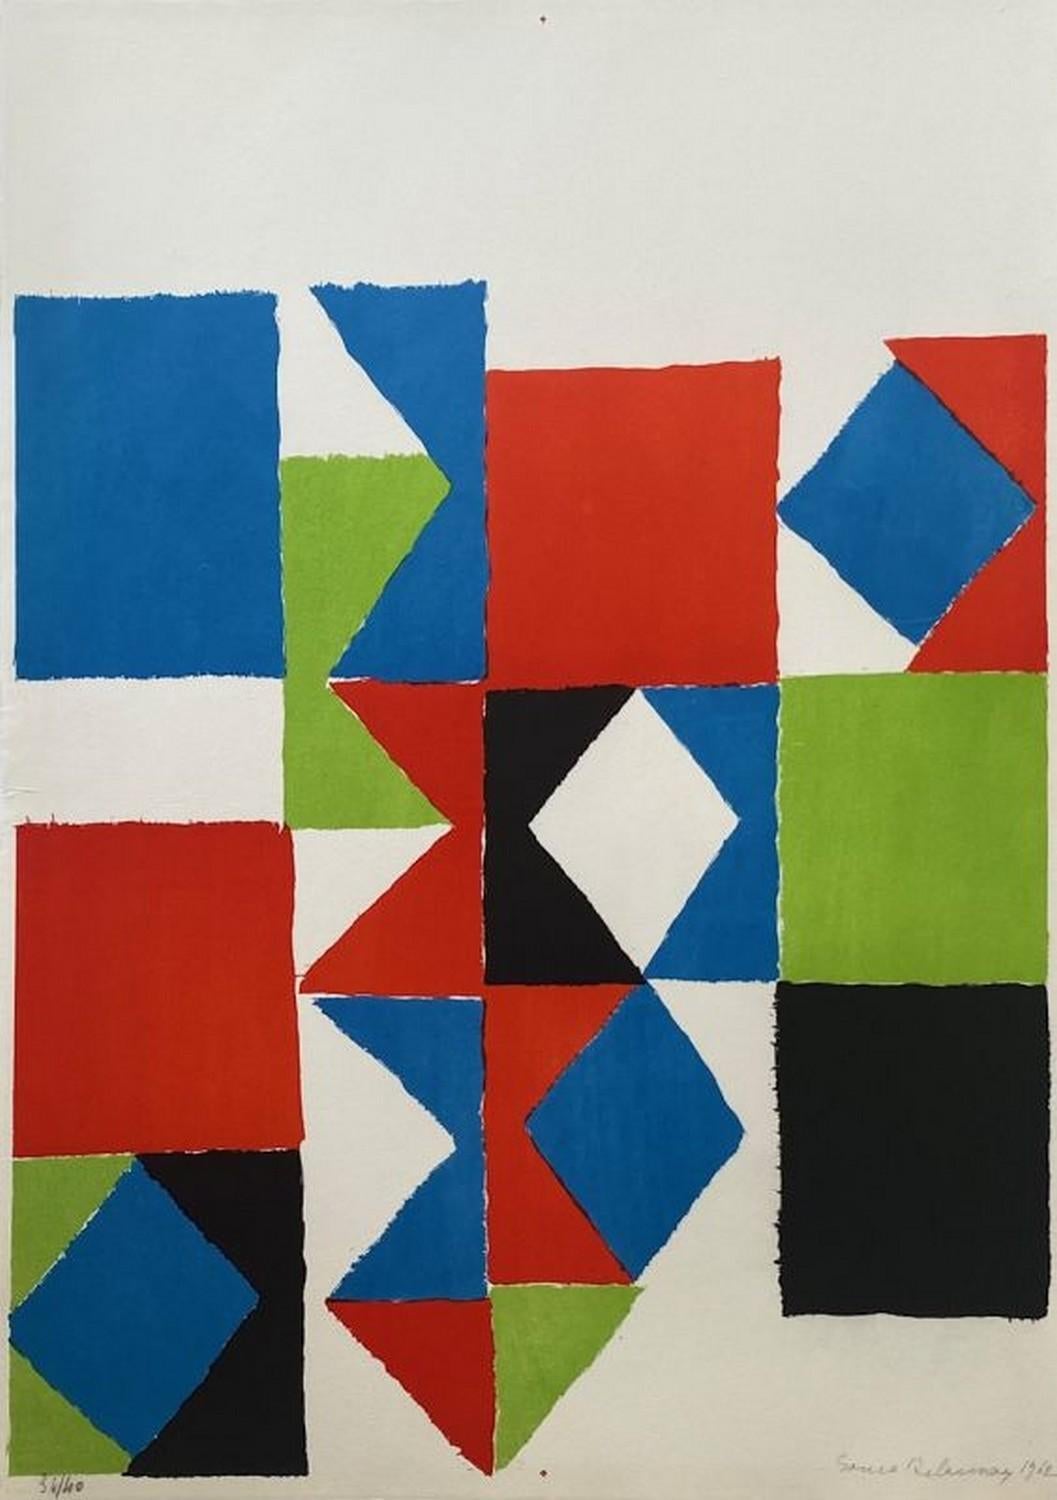 Abstract Print Sonia Delaunay - Rythme-couleur 